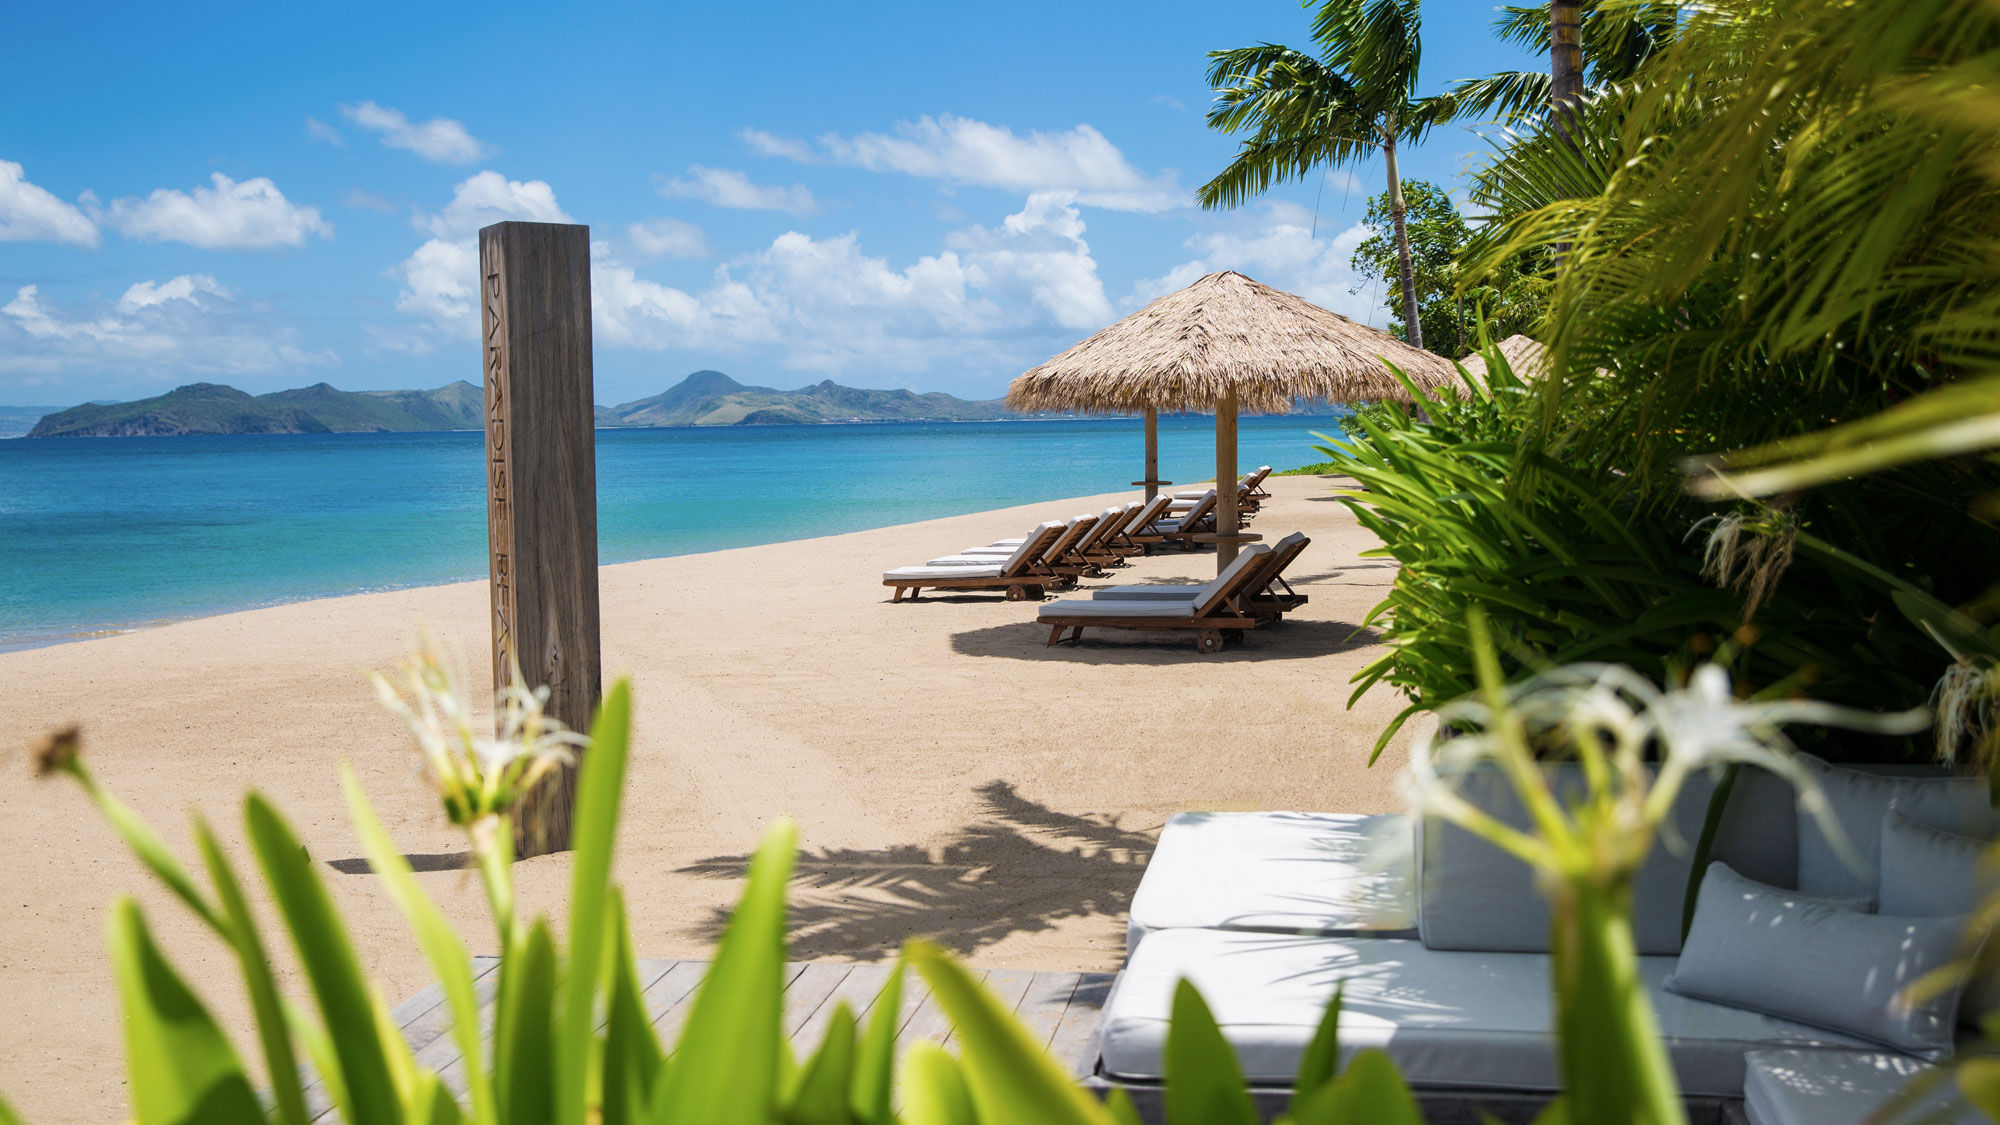 St. Kitts and Nevis drop all Covid restrictions: Travel Weekly